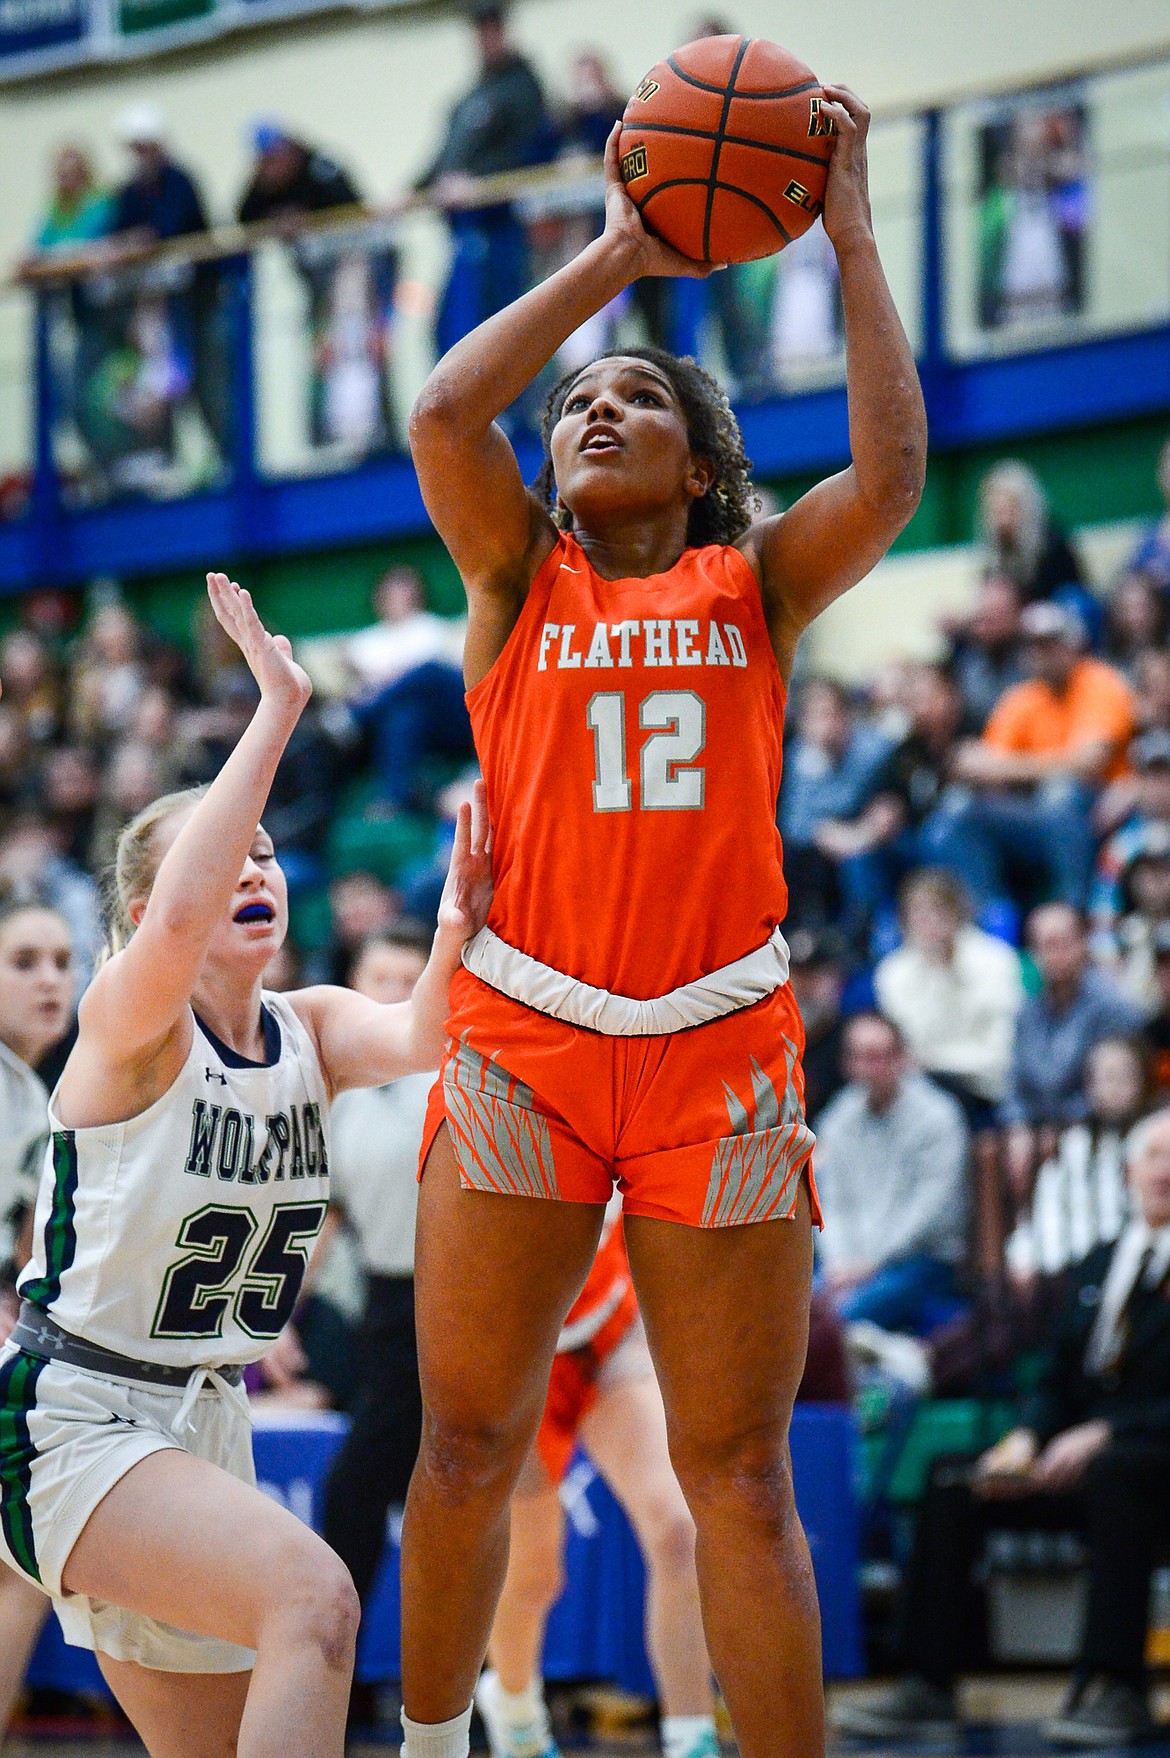 Flathead's Akilah Kubi (12) looks to shoot in the second half during crosstown basketball at Glacier High School on Friday, Jan. 20. (Casey Kreider/Daily Inter Lake)